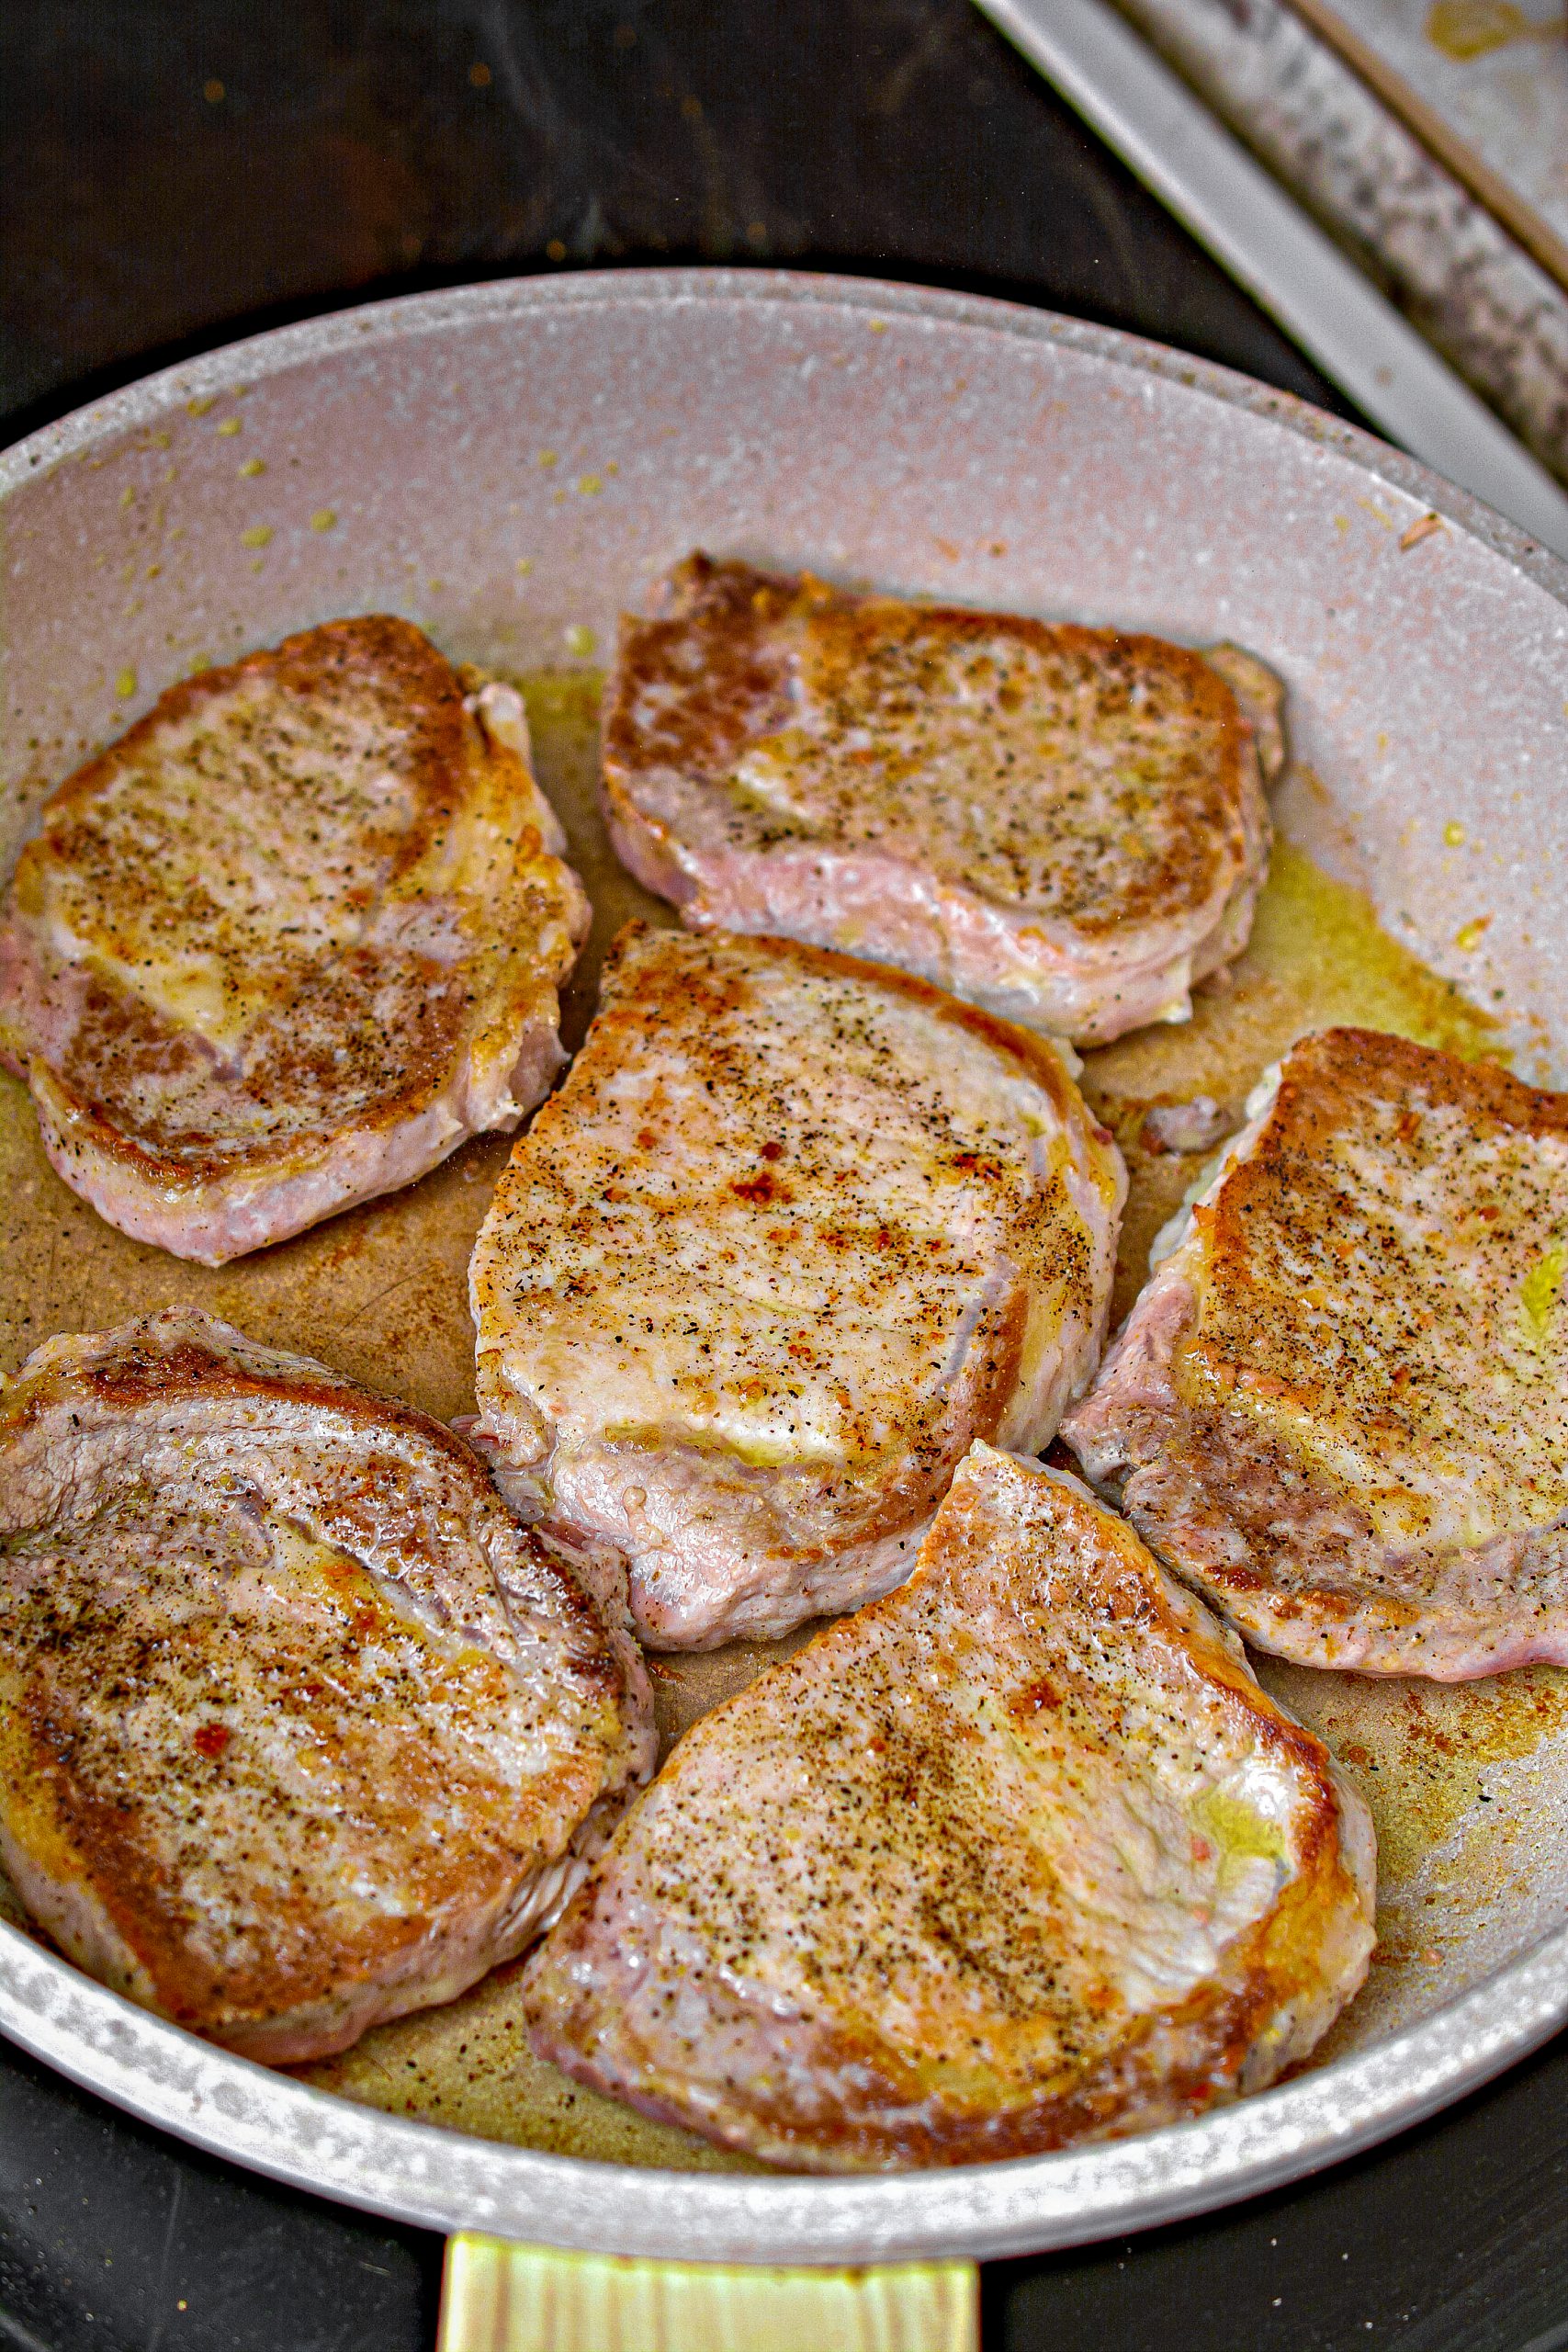 Add the pork chops to the heated skillet and brown on both sides. Remove, and set aside.